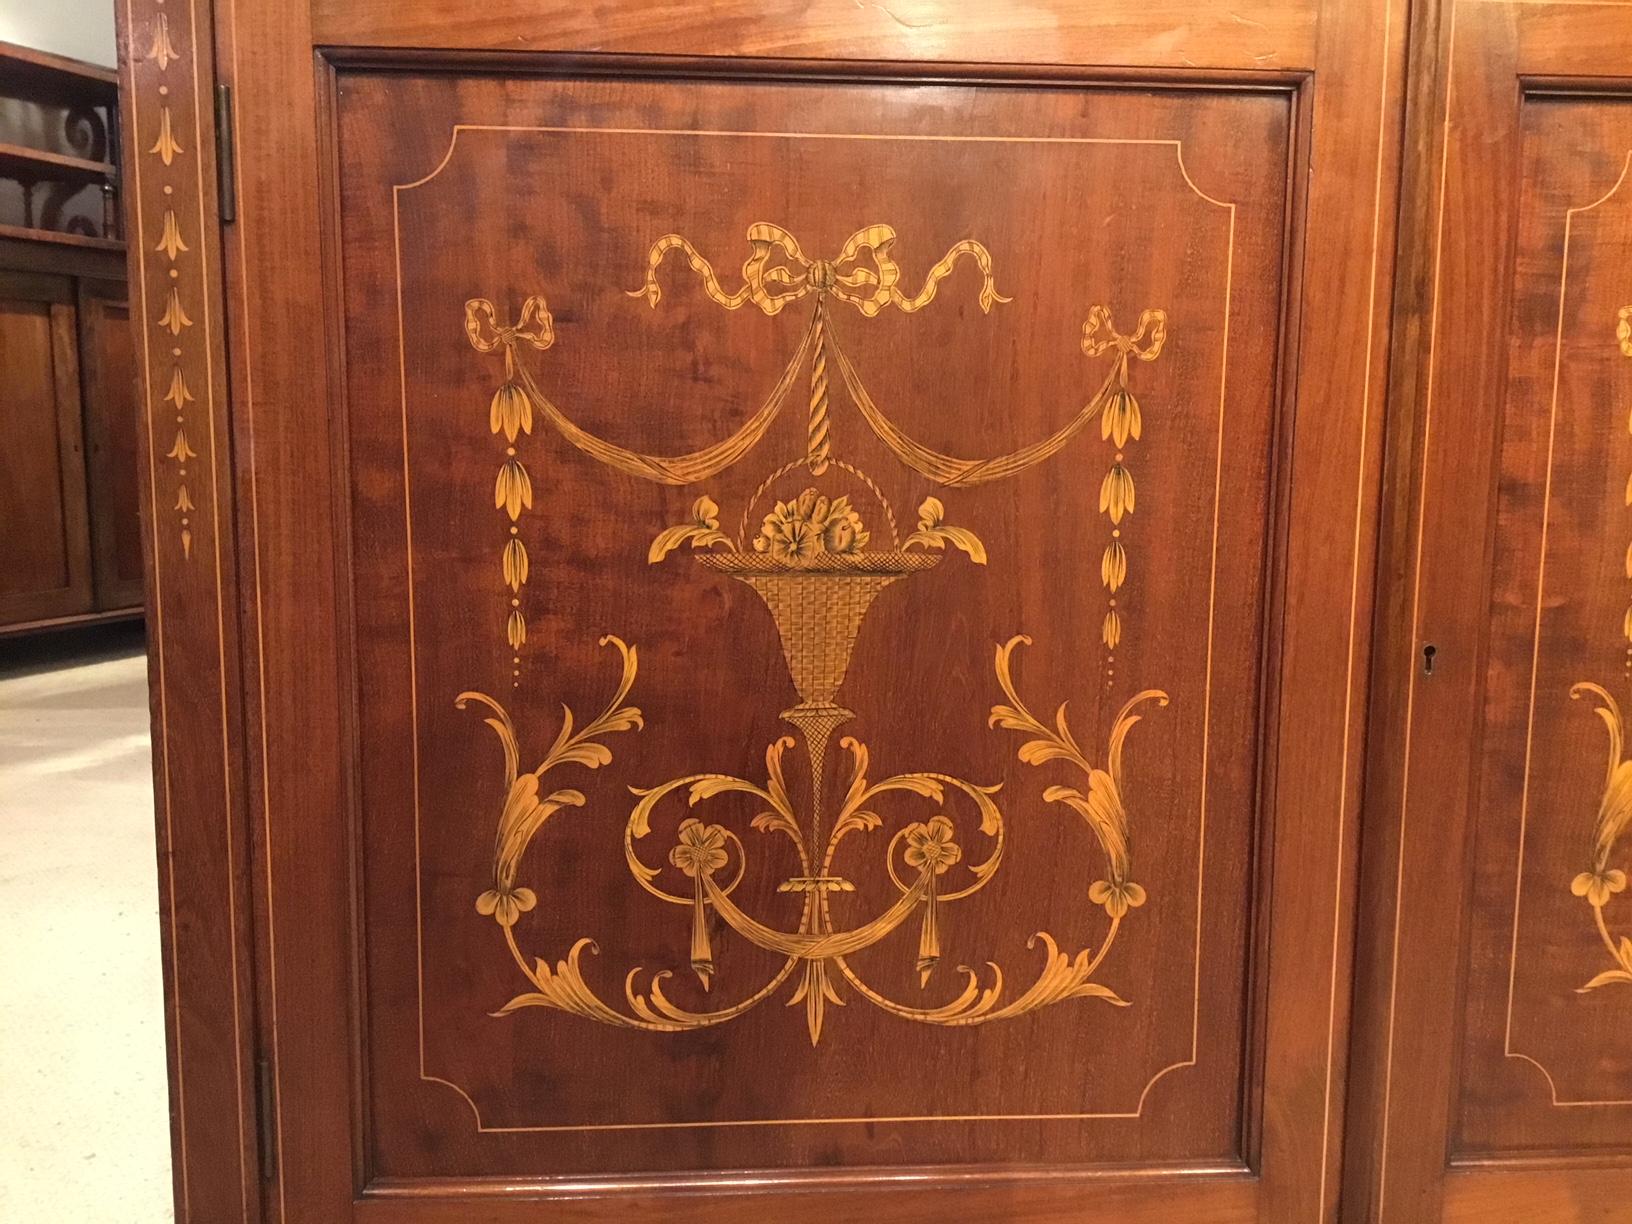  Marquetry Inlaid Edwardian Period Antique Bookcase 10